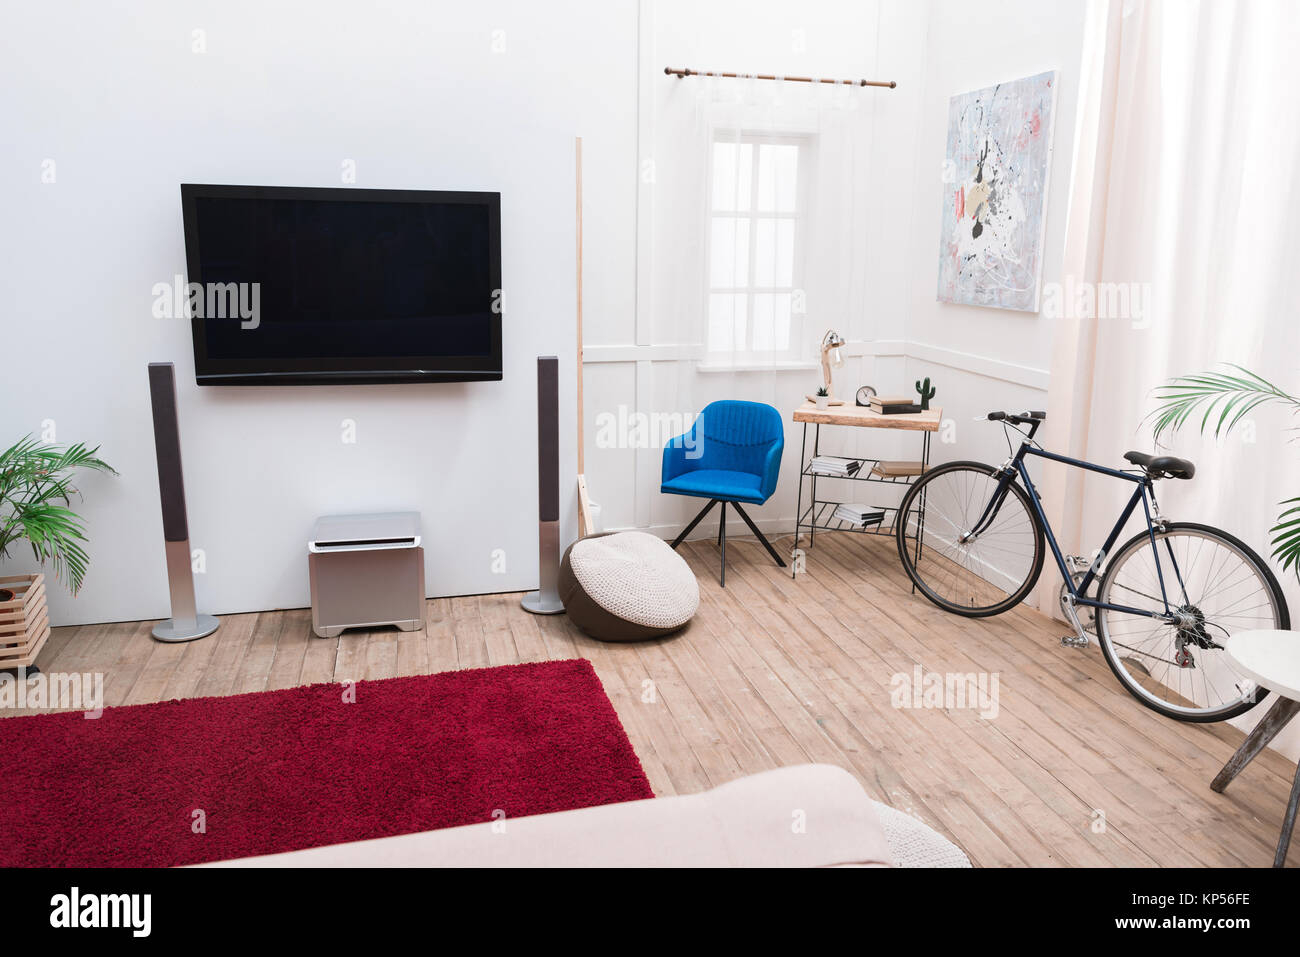 Interior of the living room with TV screen and sound speakers Stock Photo